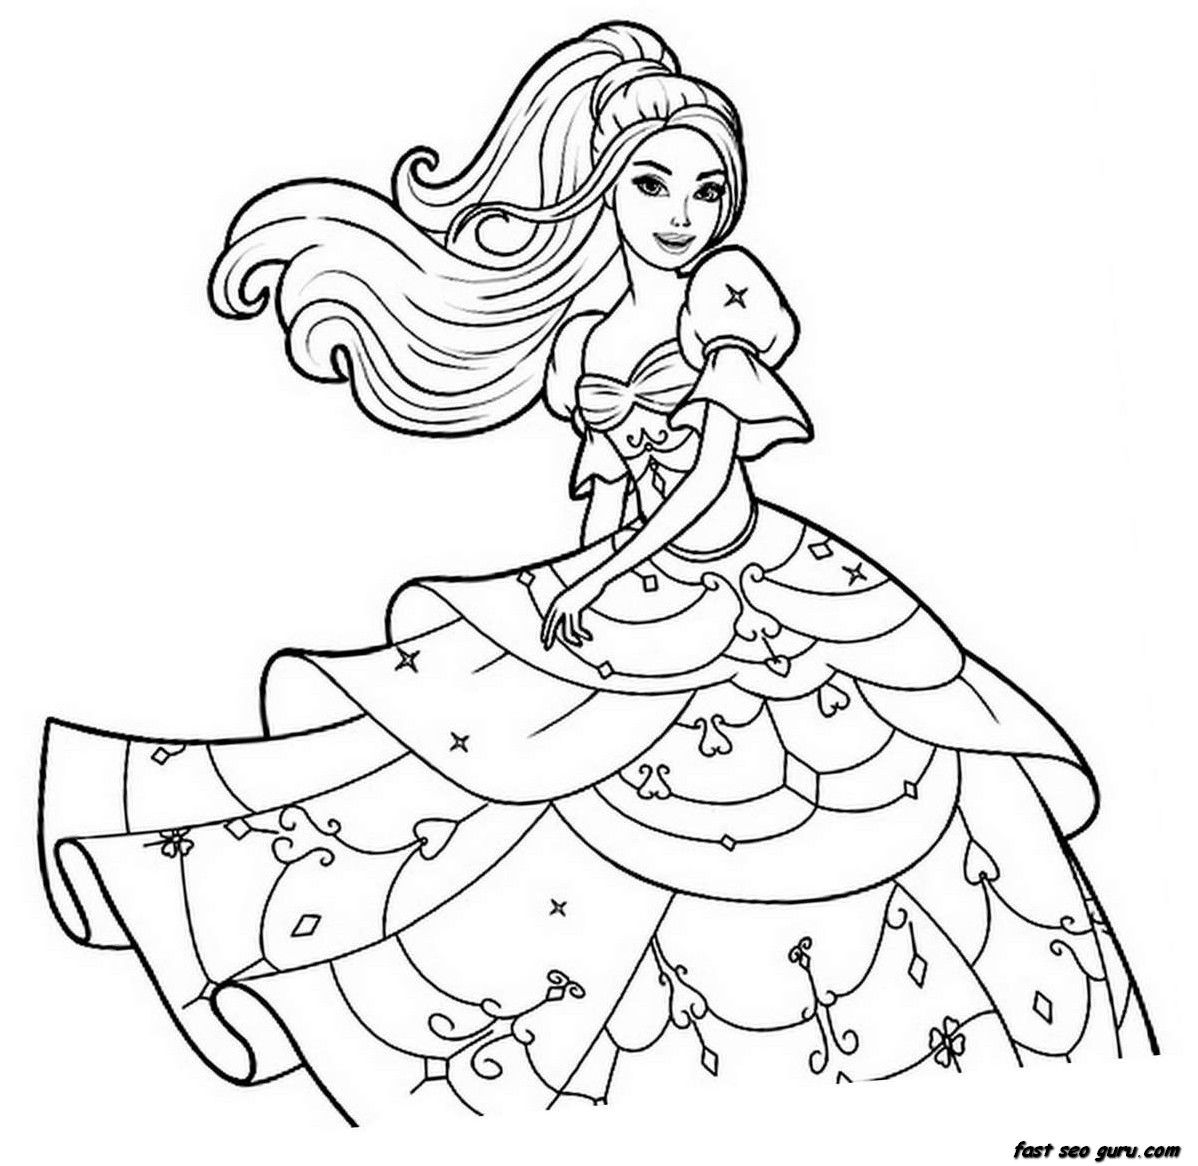 Barbie Coloring Pages - Dr. Odd